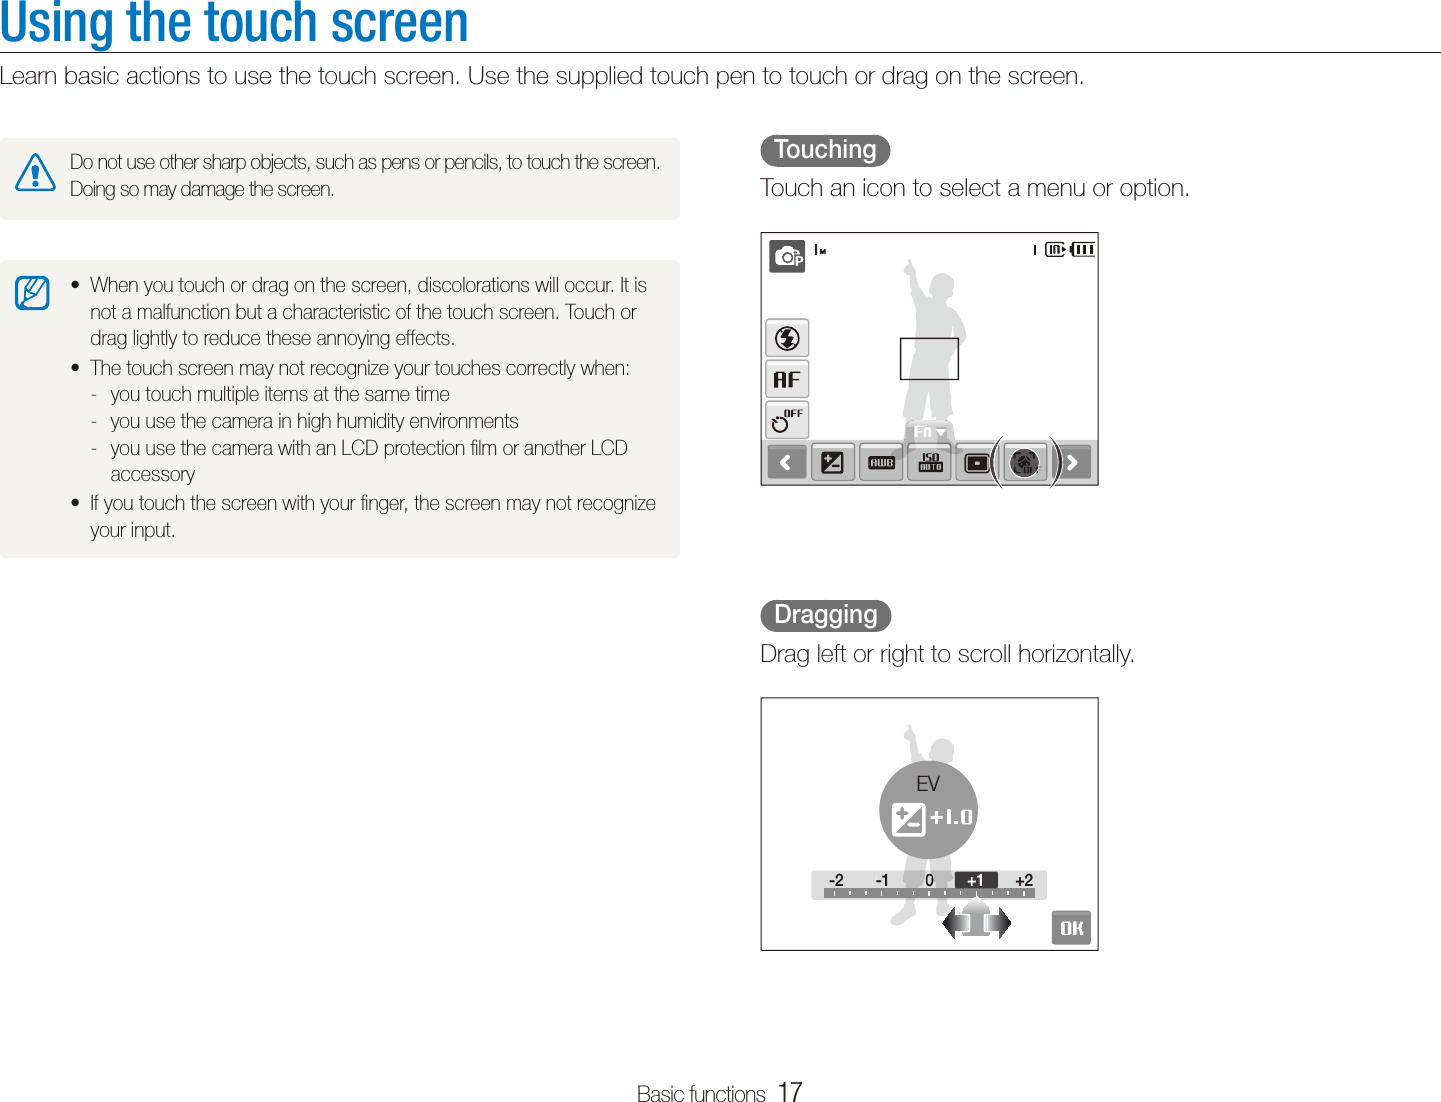 Basic functions  17Using the touch screenLearn basic actions to use the touch screen. Use the supplied touch pen to touch or drag on the screen.  Touching  Touch an icon to select a menu or option.  Dragging  Drag left or right to scroll horizontally.-2 -1 0 +2-2-100+2+1EVDo not use other sharp objects, such as pens or pencils, to touch the screen. Doing so may damage the screen.When you touch or drag on the screen, discolorations will occur. It is tnot a malfunction but a characteristic of the touch screen. Touch or drag lightly to reduce these annoying effects.The touch screen may not recognize your touches correctly when:tyou touch multiple items at the same time -you use the camera in high humidity environments -you use the camera with an LCD protection ﬁlm or another LCD  -accessoryIf you touch the screen with your ﬁnger, the screen may not recognize tyour input.